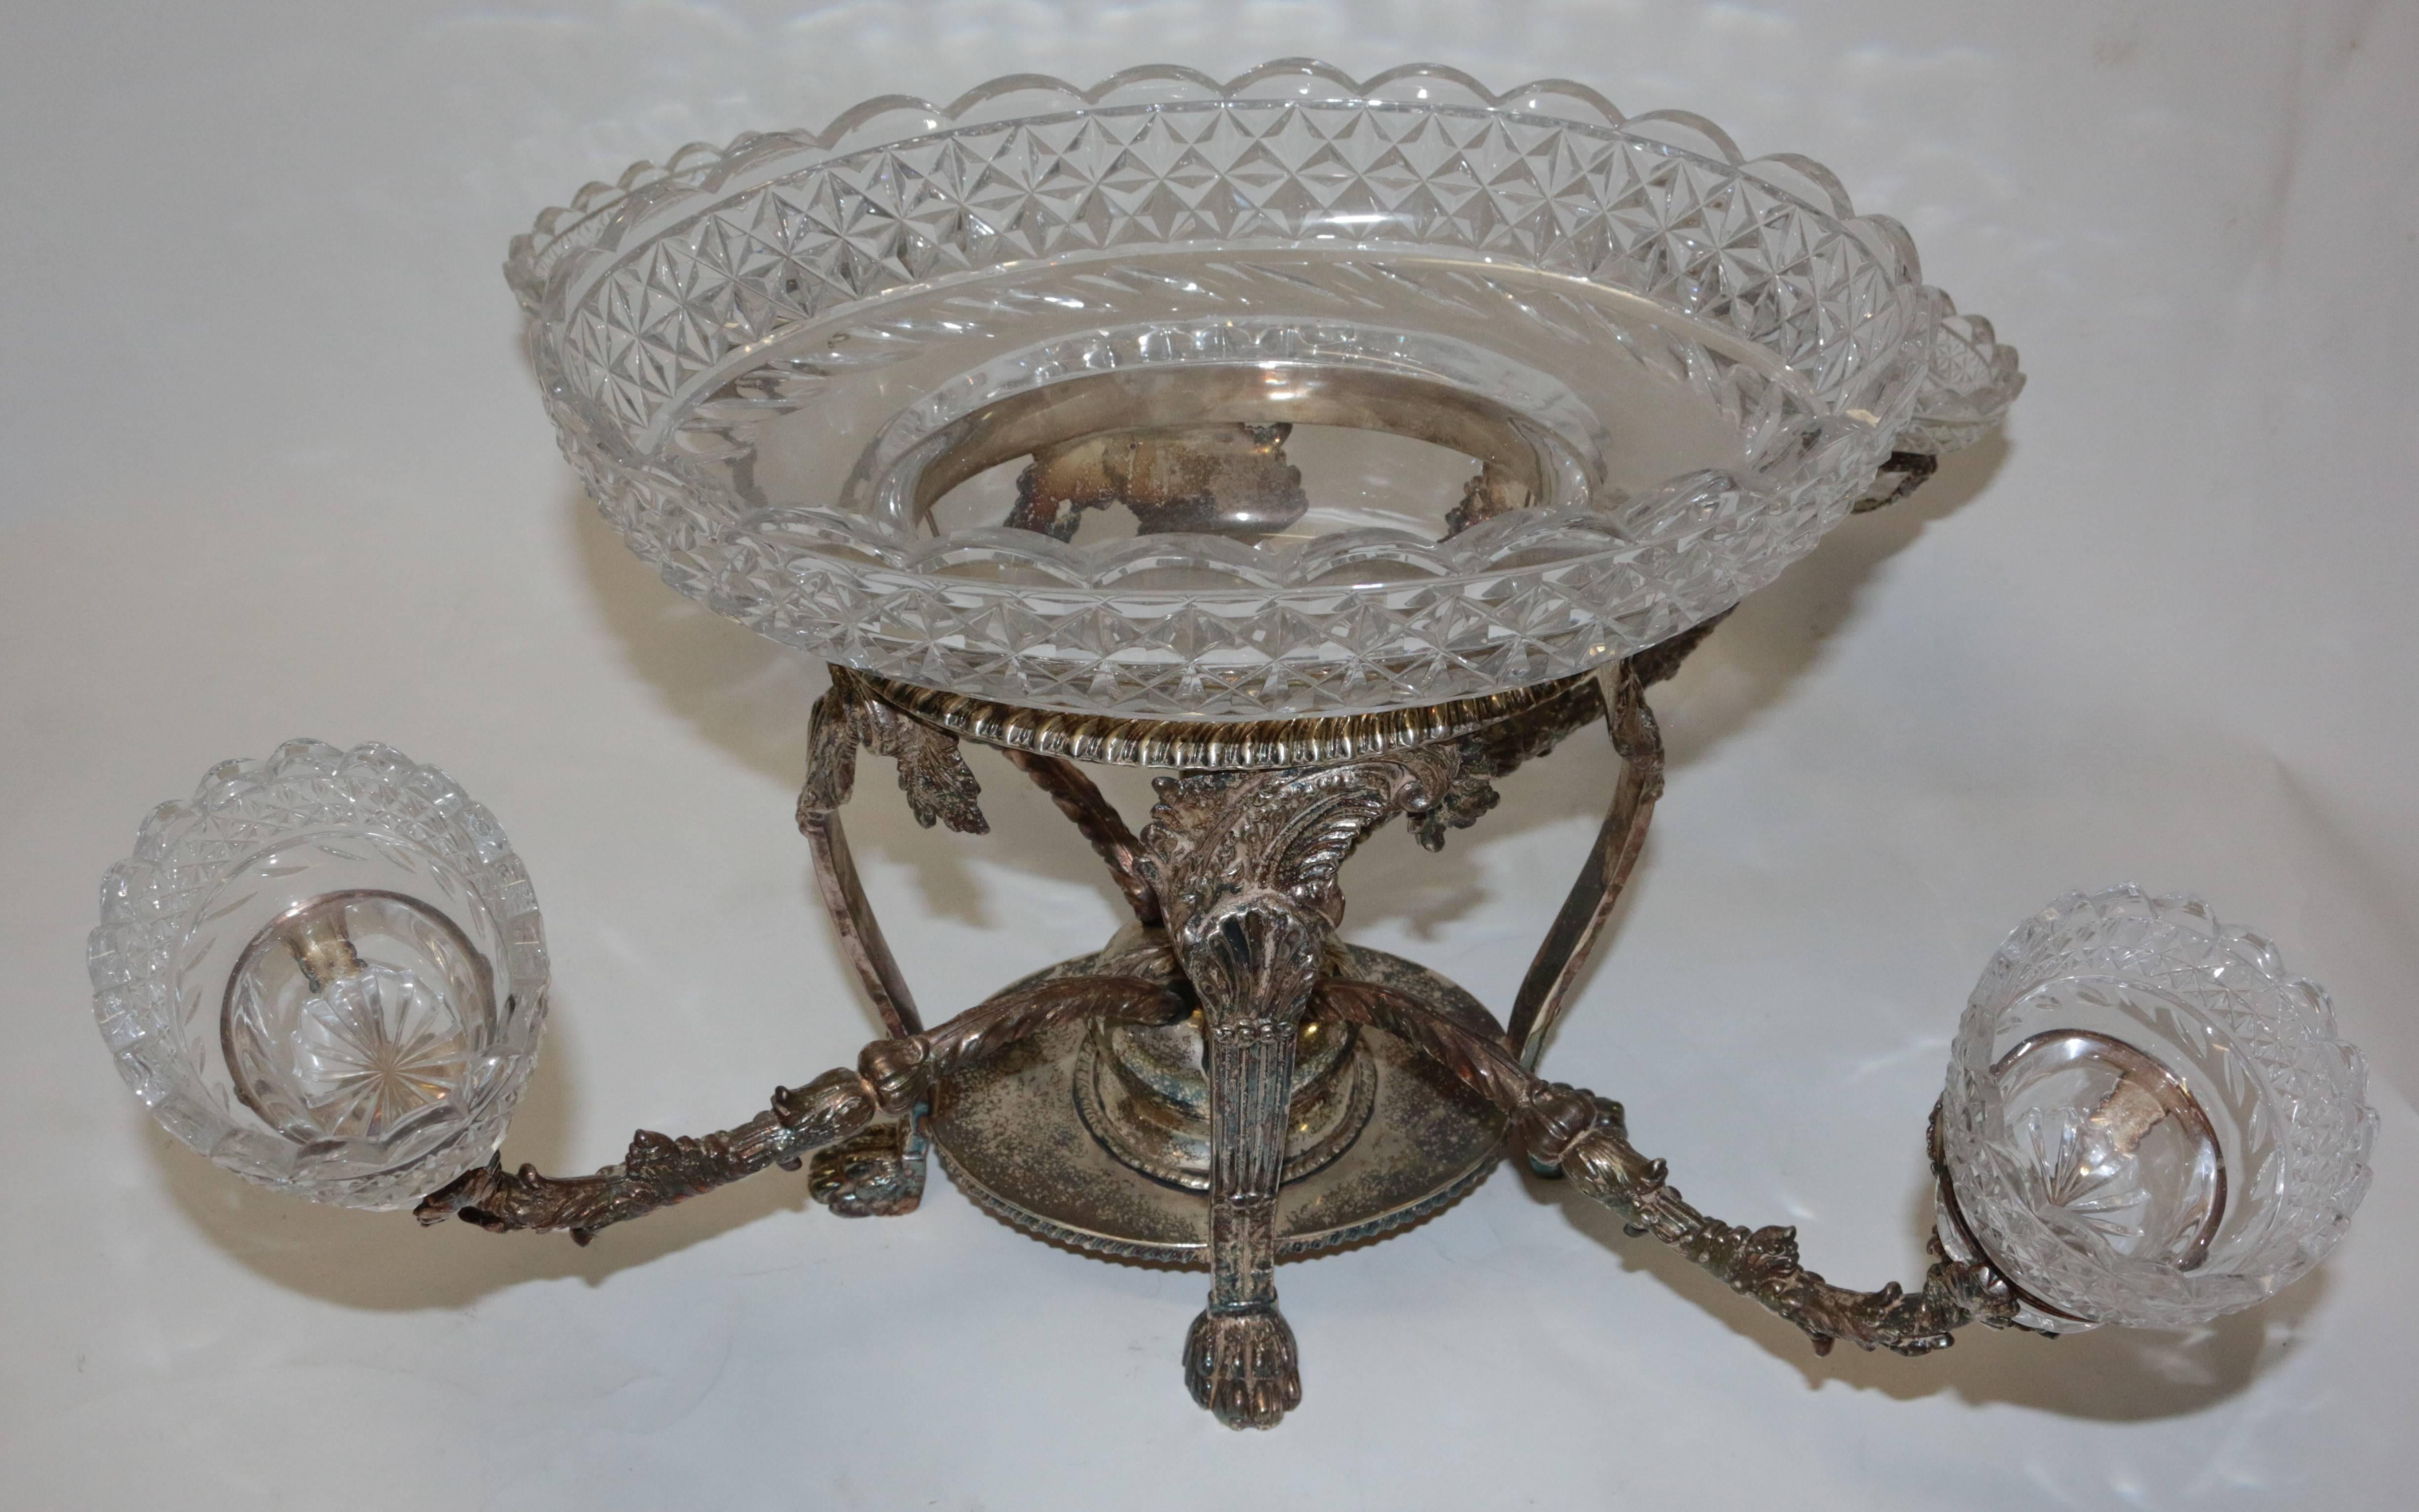 This 19th century English silver plated centrepiece is in amazing condition. The crystals are in great shape.
The smaller cut crystal measures:
5.5 x 3.5
crystal centrepiece measures:
12.5 x 8.5.
 